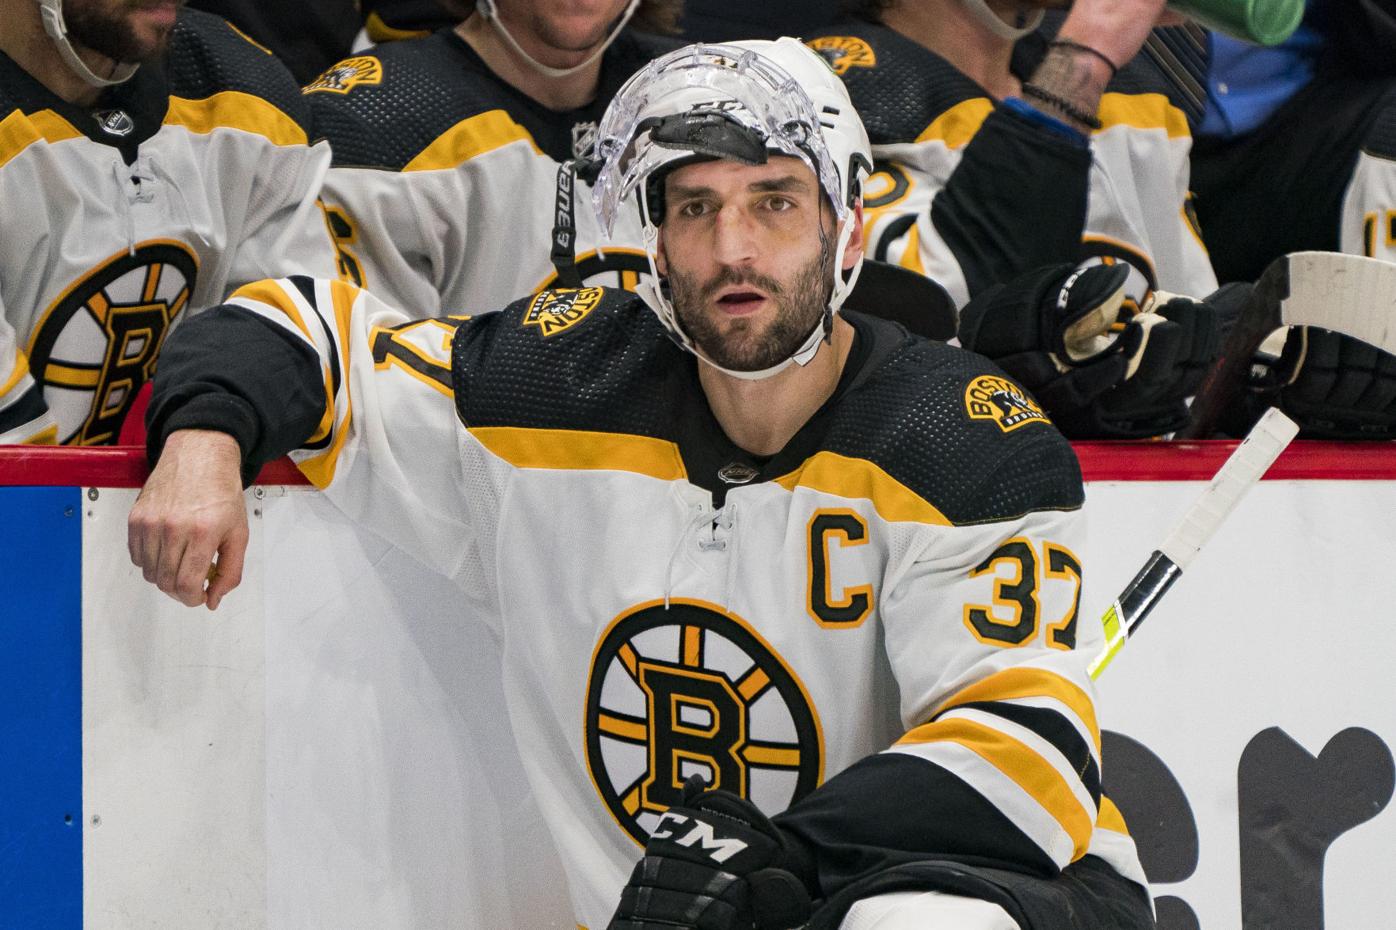 The reason Patrice Bergeron will leave the Bruins this offseason